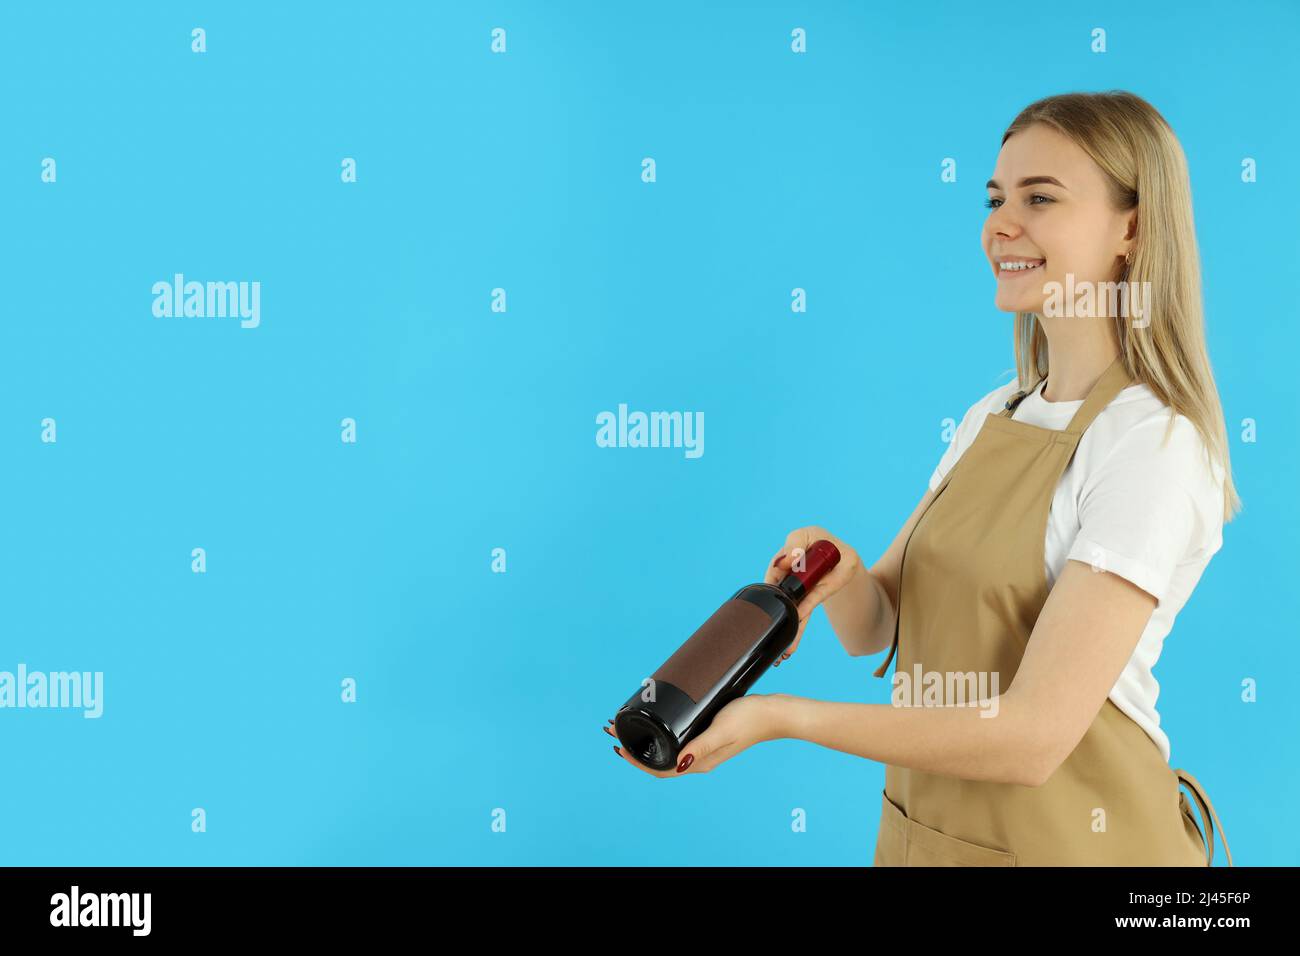 Concept of job with young woman waiter, space for text Stock Photo